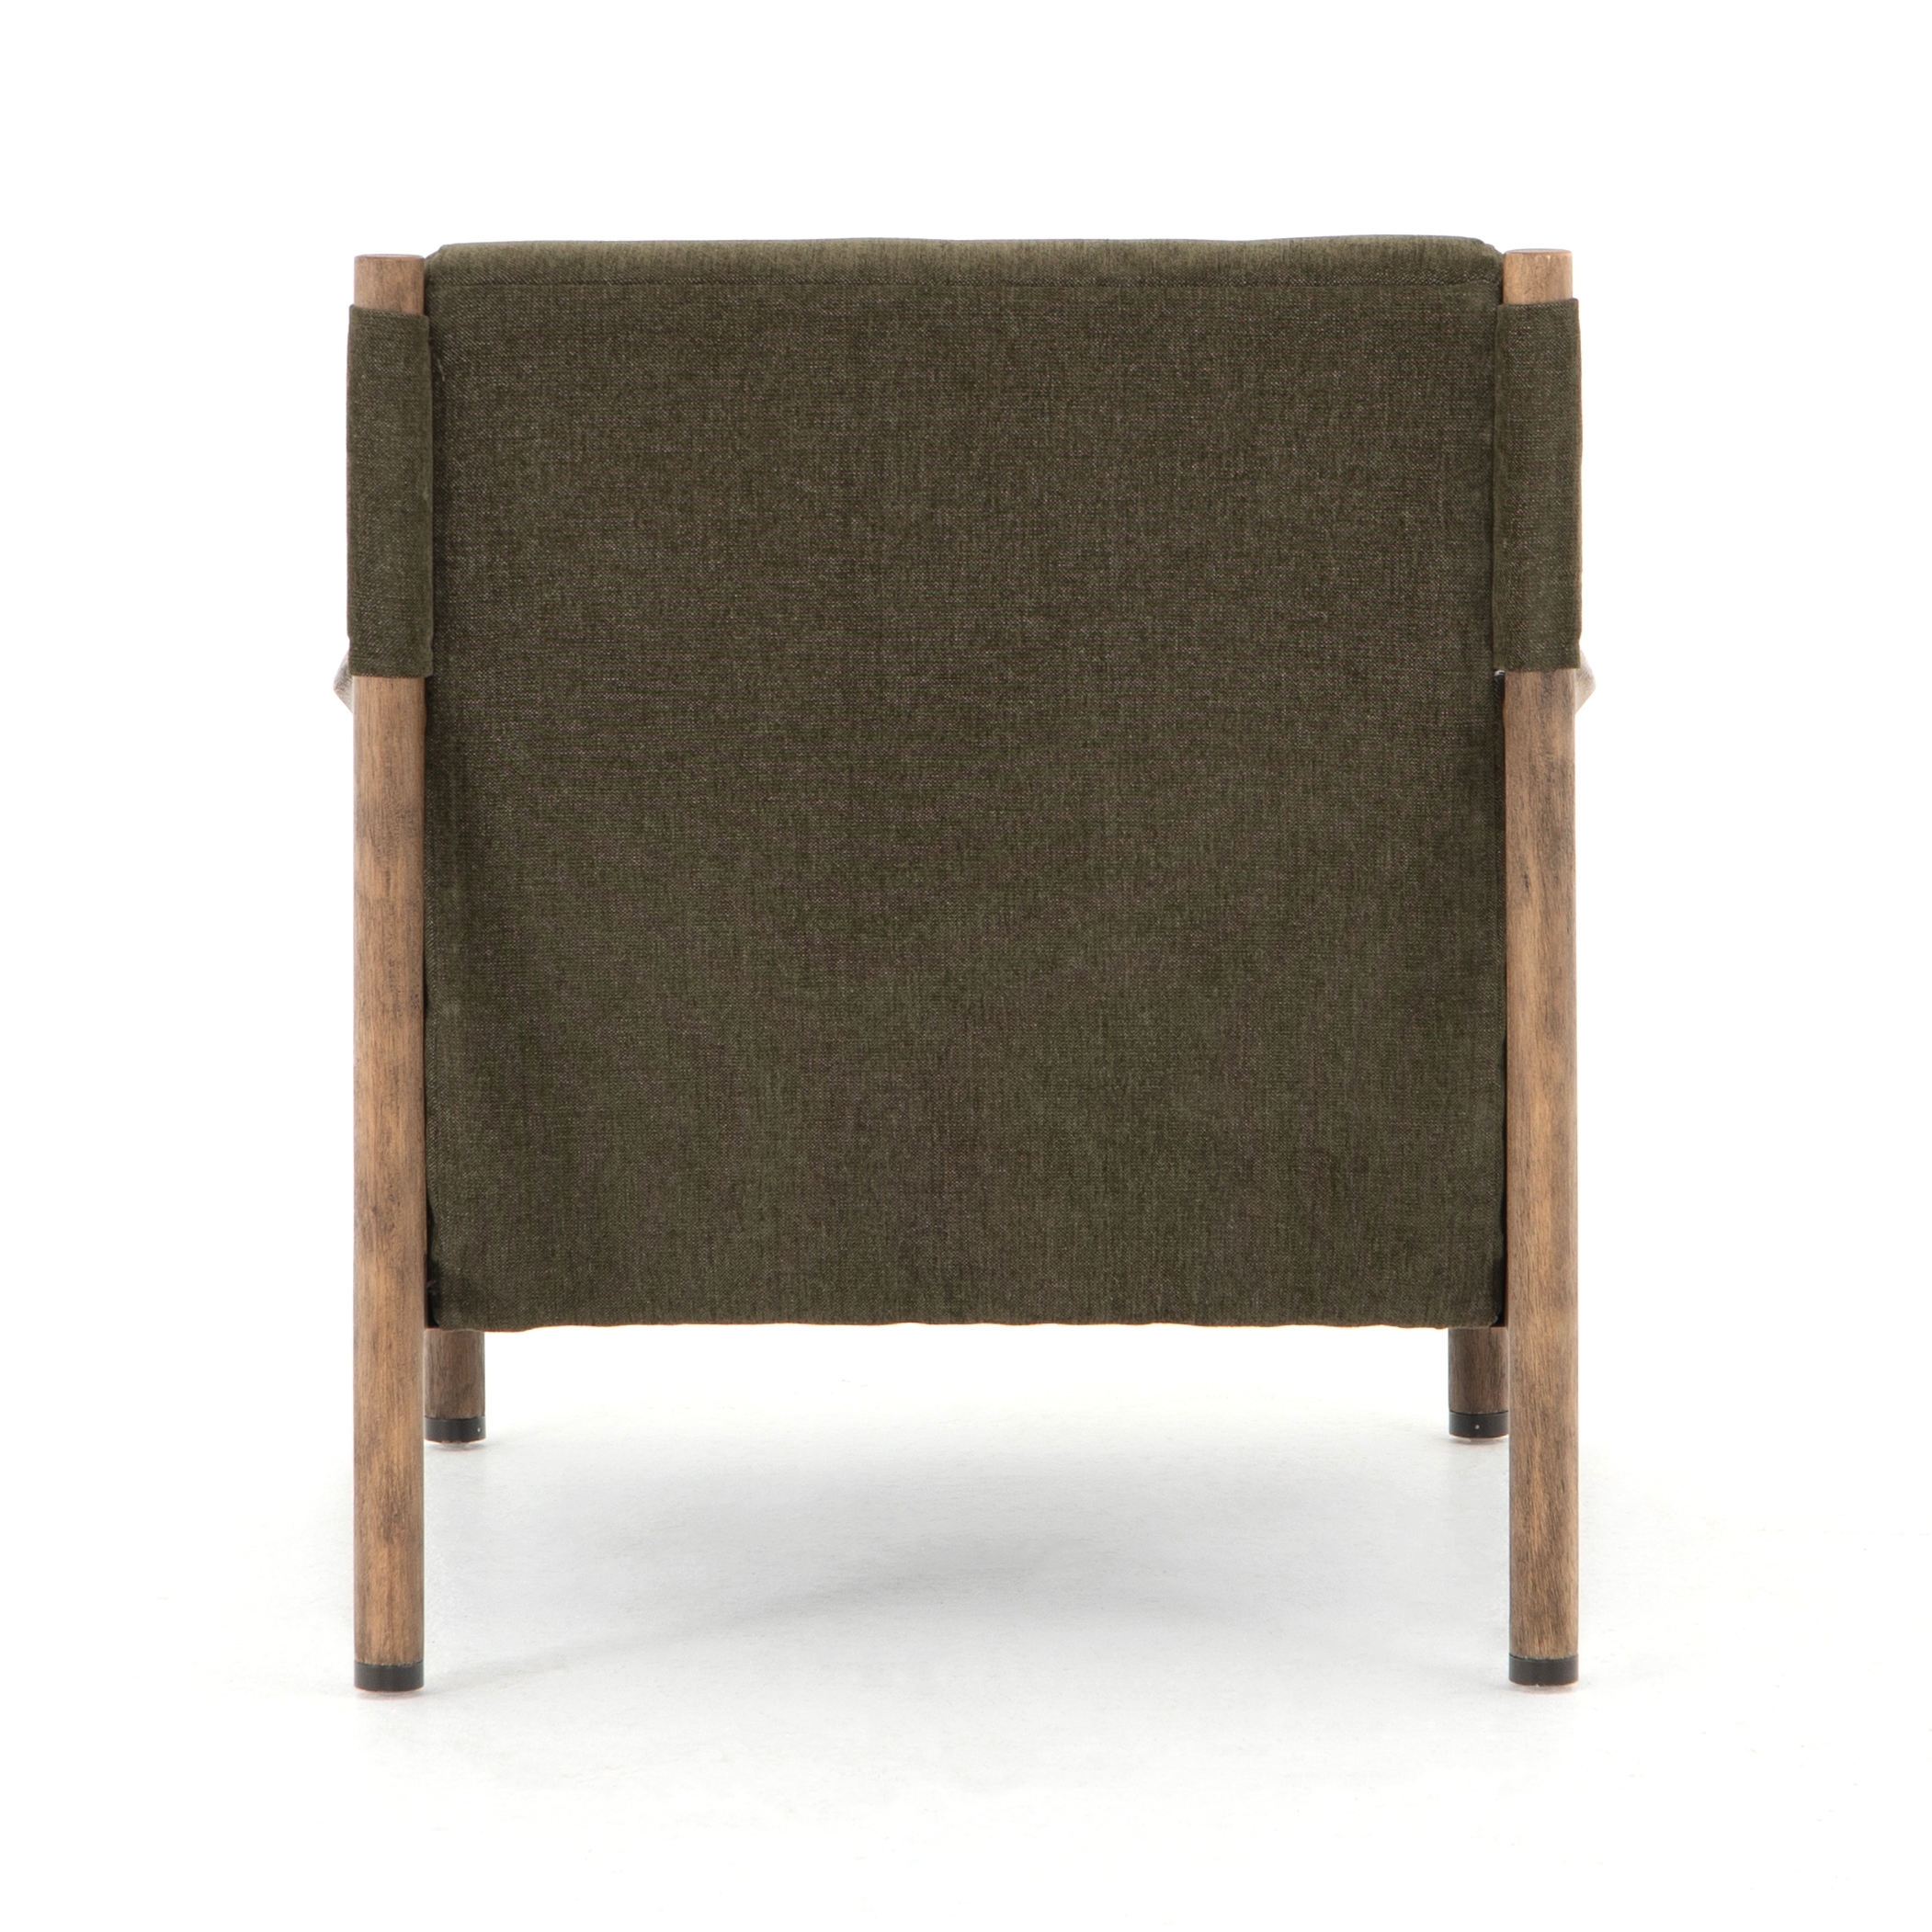 Kempsey Chair-Sutton Olive - Image 4